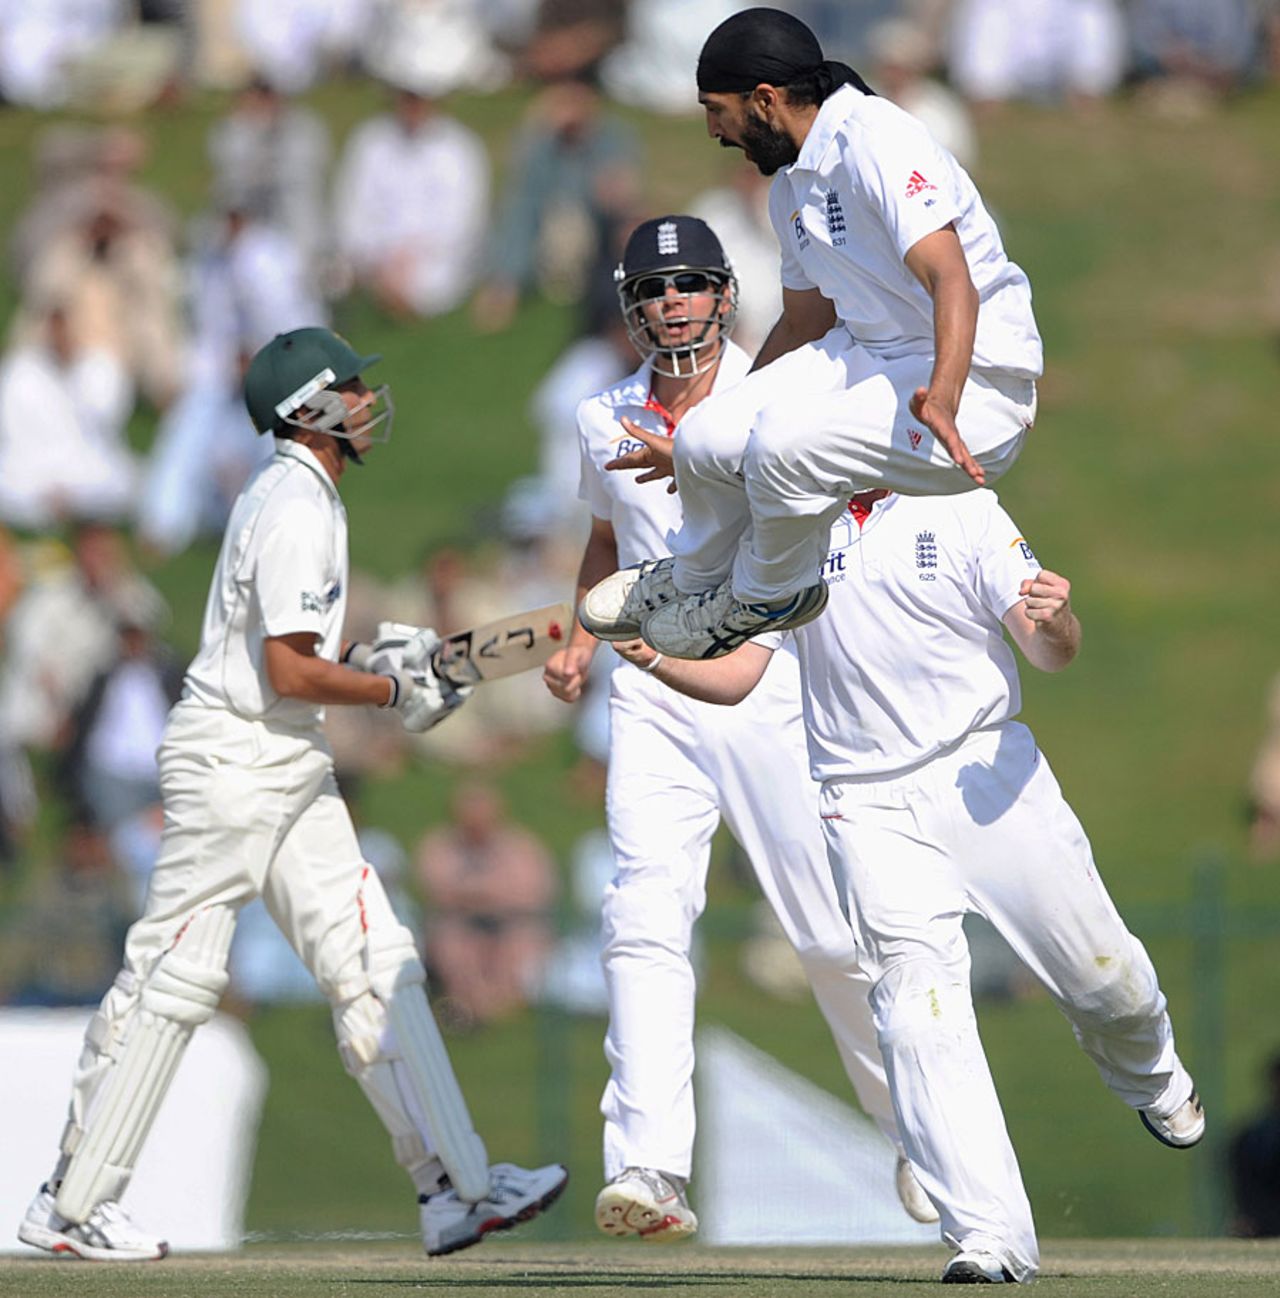 Monty Panesar leaps after bowling Younis Khan, Pakistan v England, 2nd Test, Abu Dhabi, 3rd Day, January 27, 2012